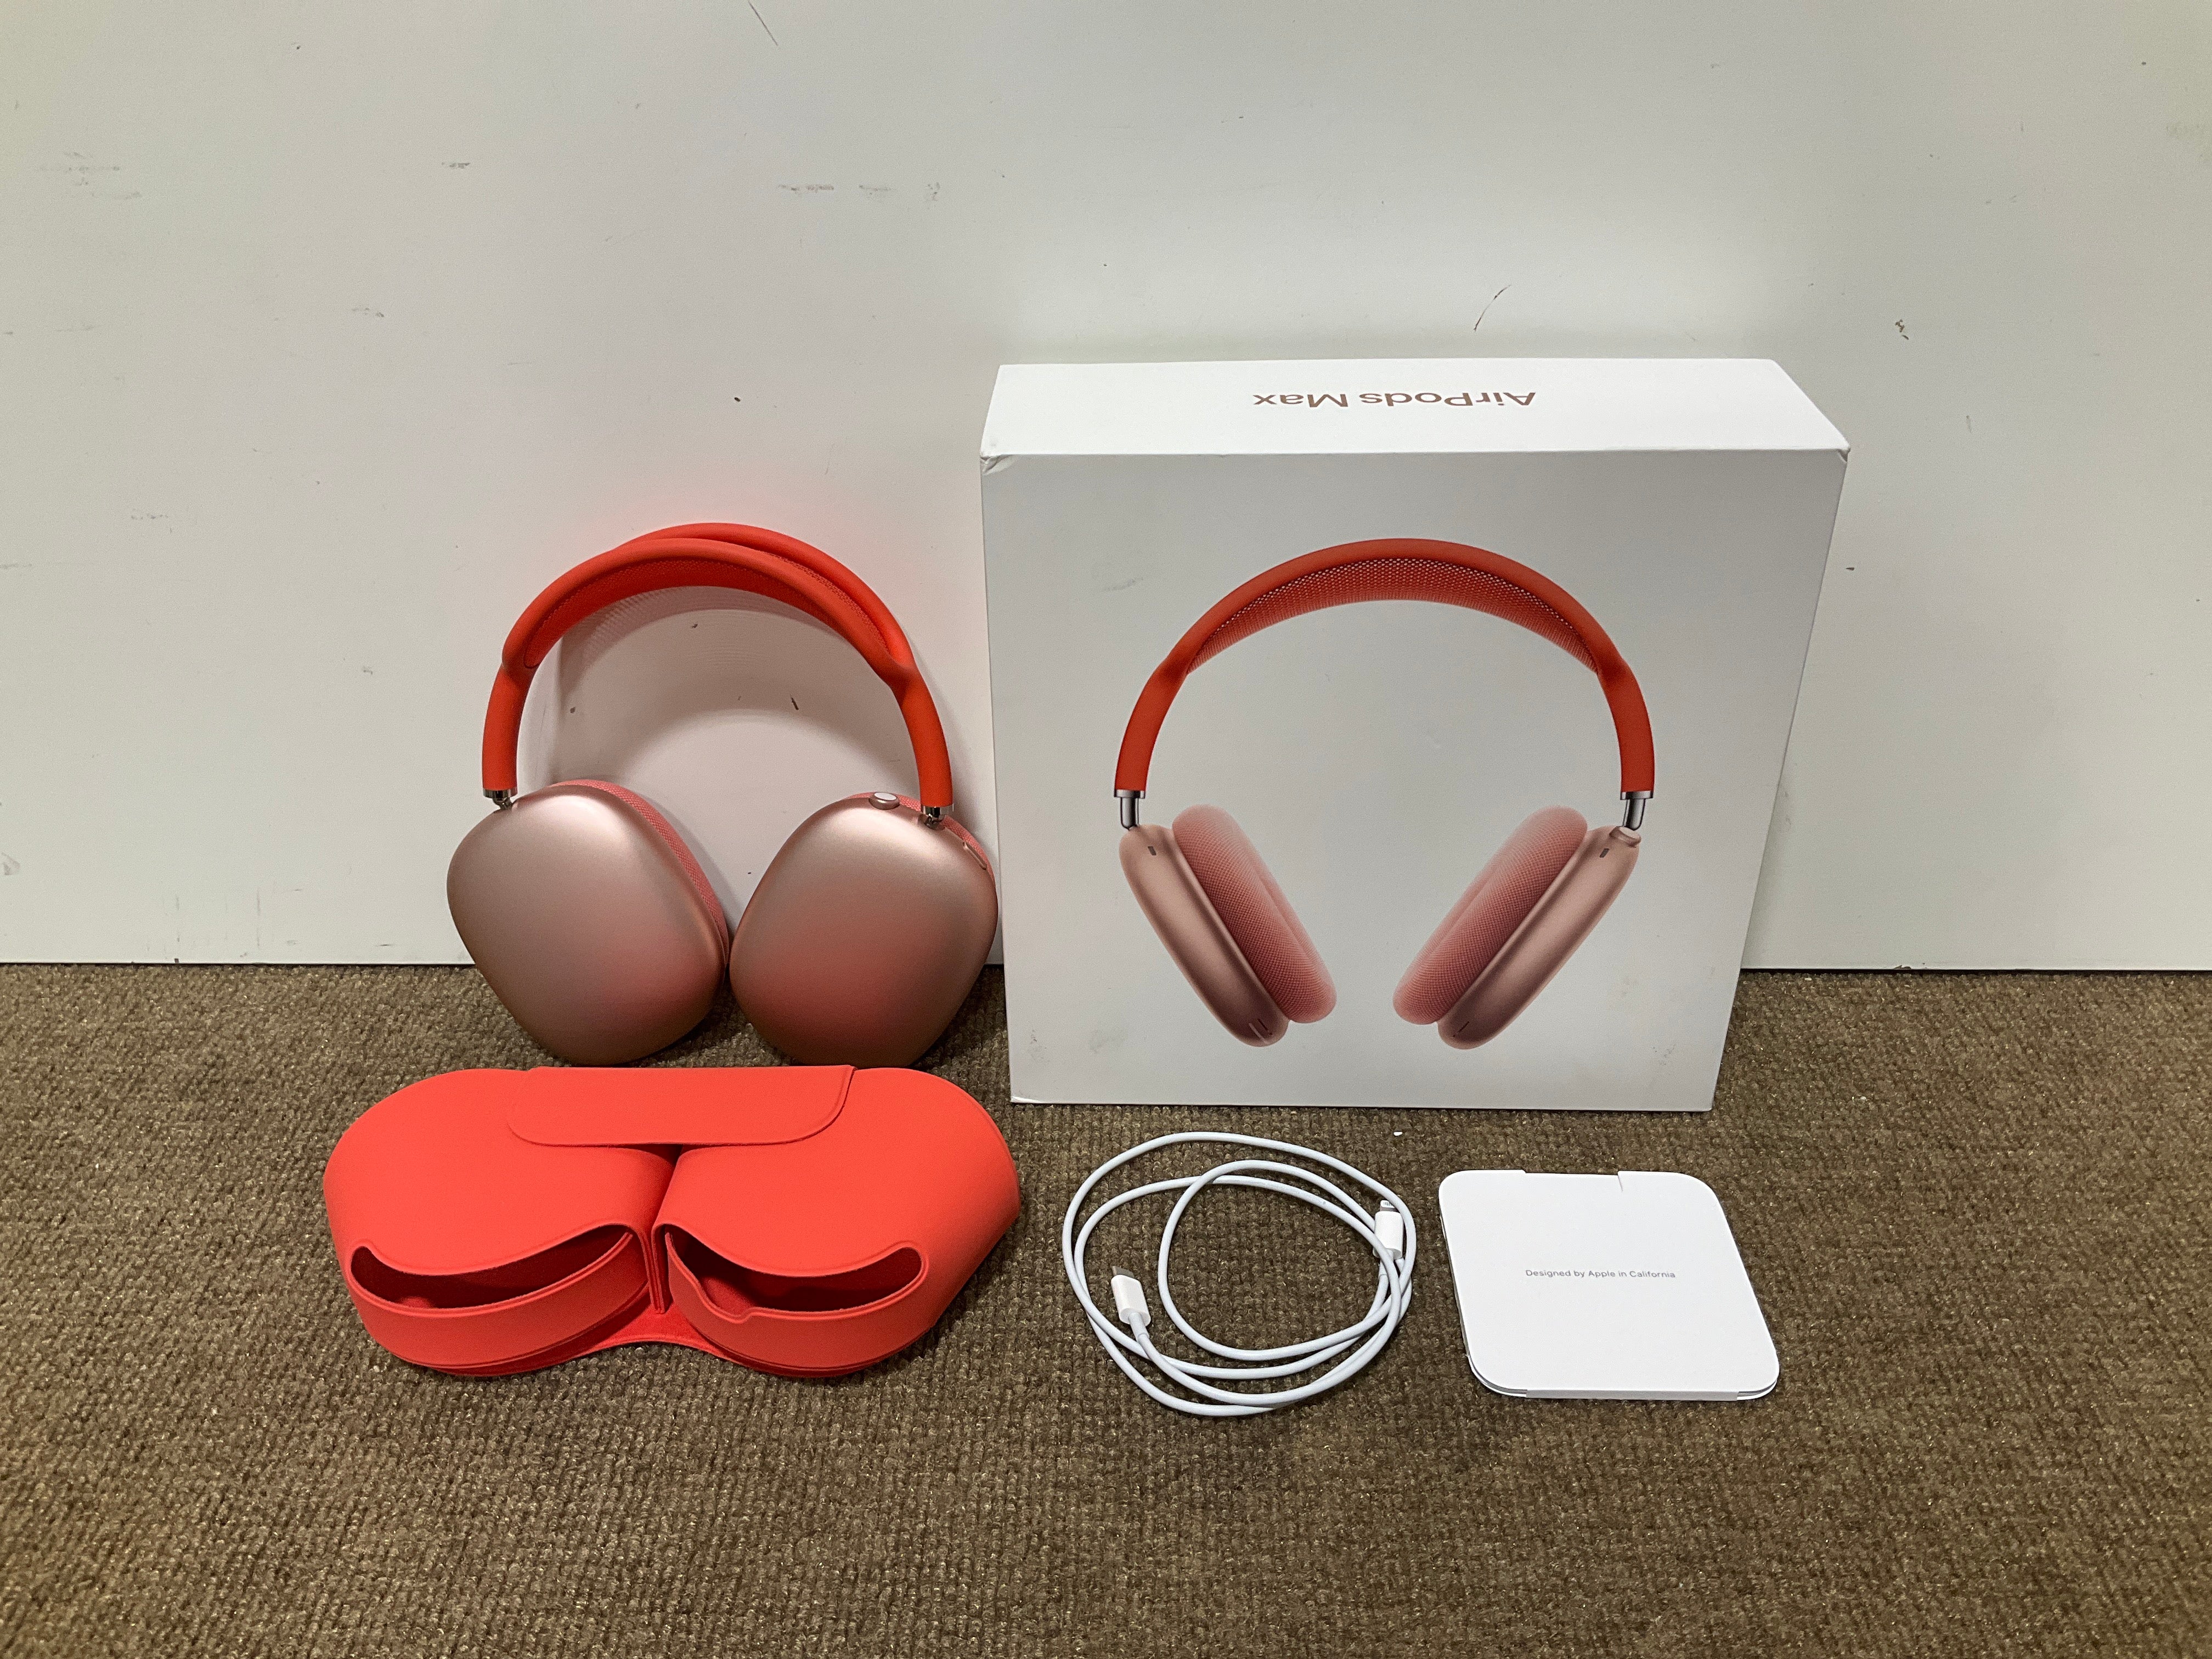 ♥ New, Open Box - Apple Airpods Max Pink MGYM3AM/A